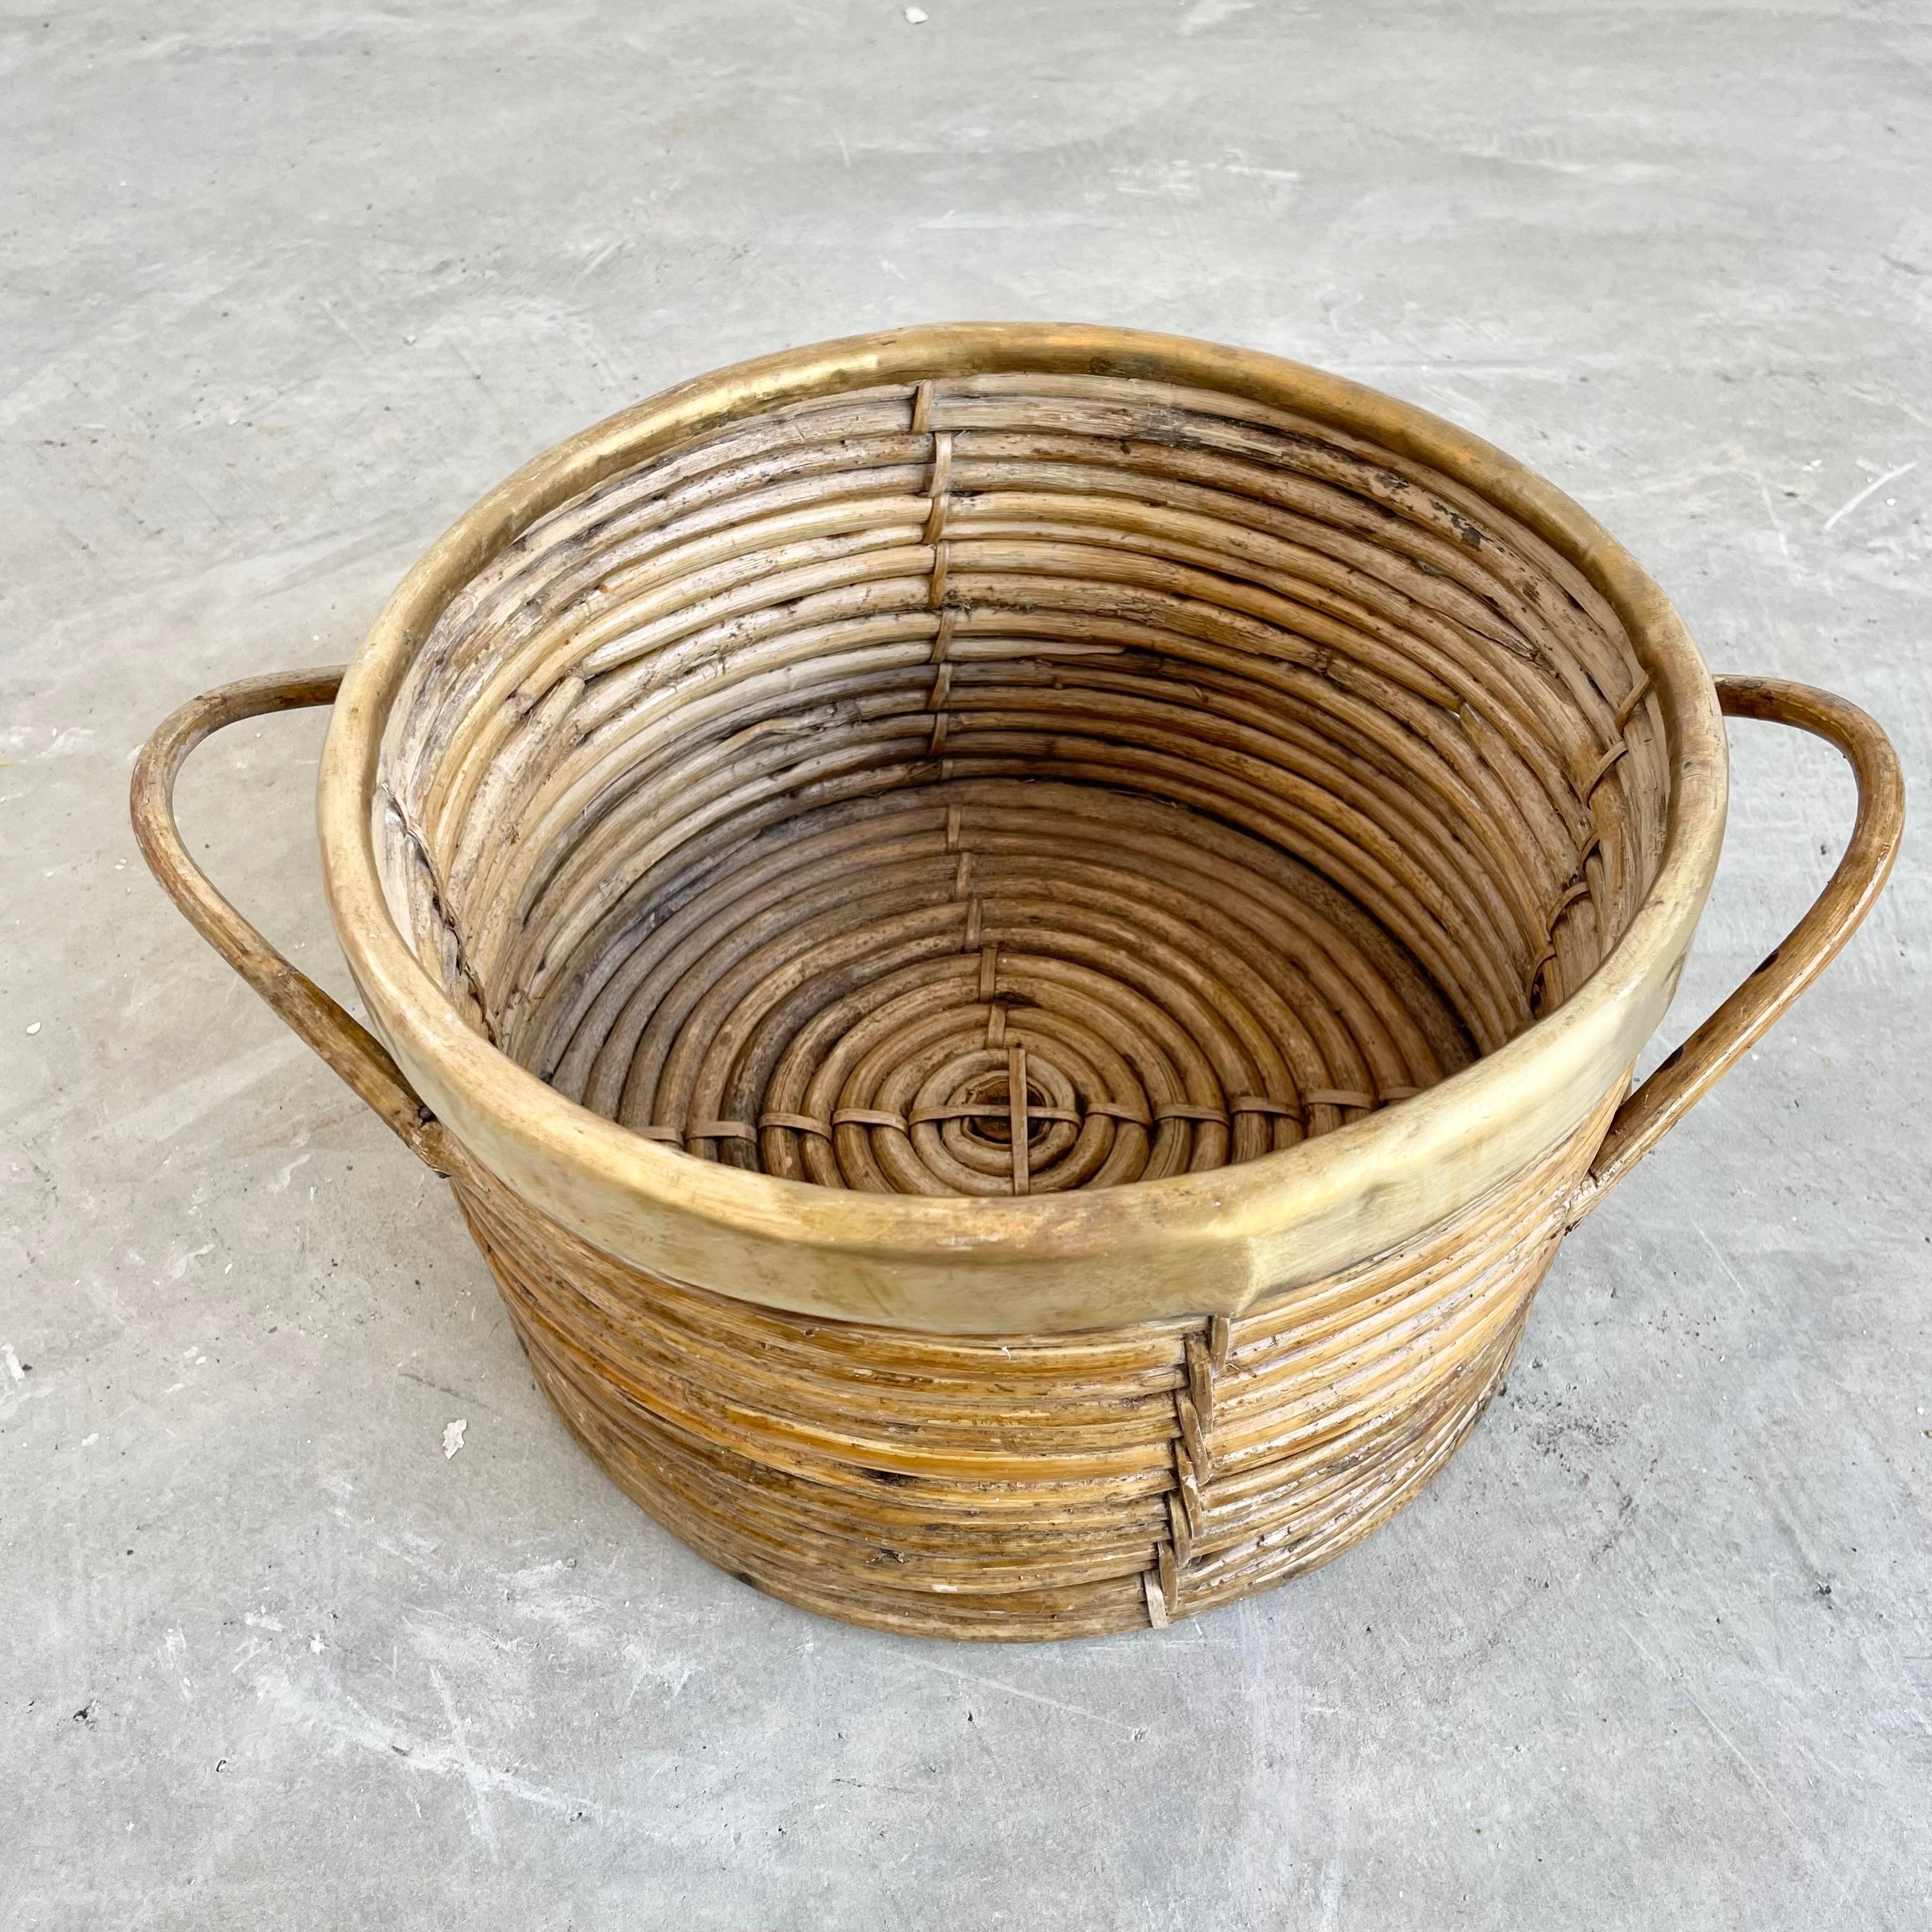 Mid-20th Century Bamboo and Brass Bowl in the Style of Gabriella Crespi, 1960s Italy